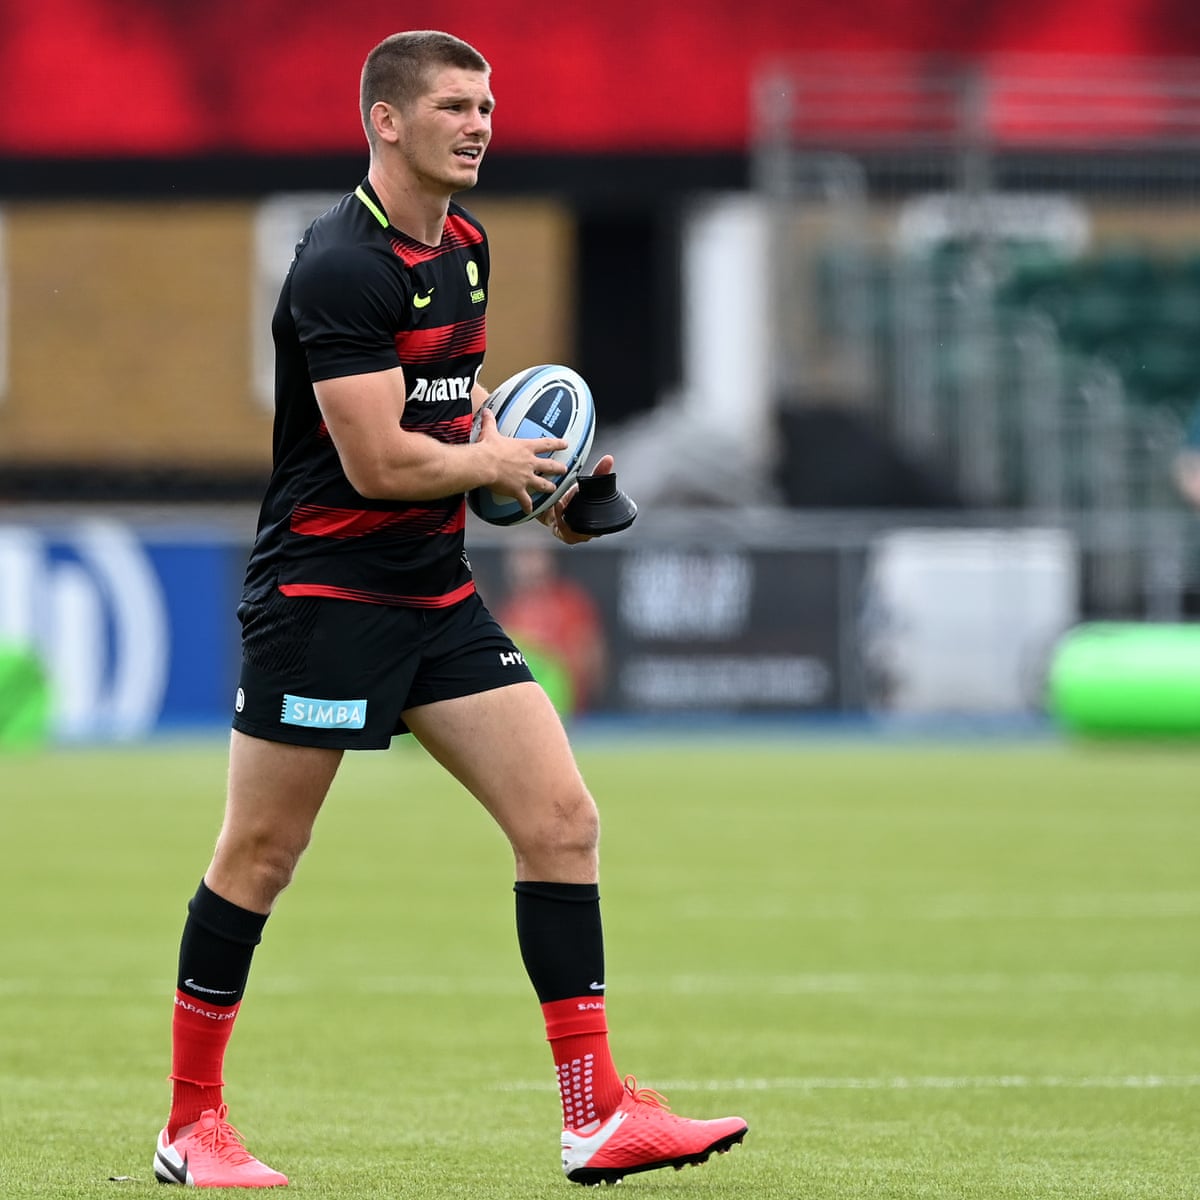 Owen Farrell plays Johnny Sexton role to help Saracens prepare for Leinster  | Saracens | The Guardian